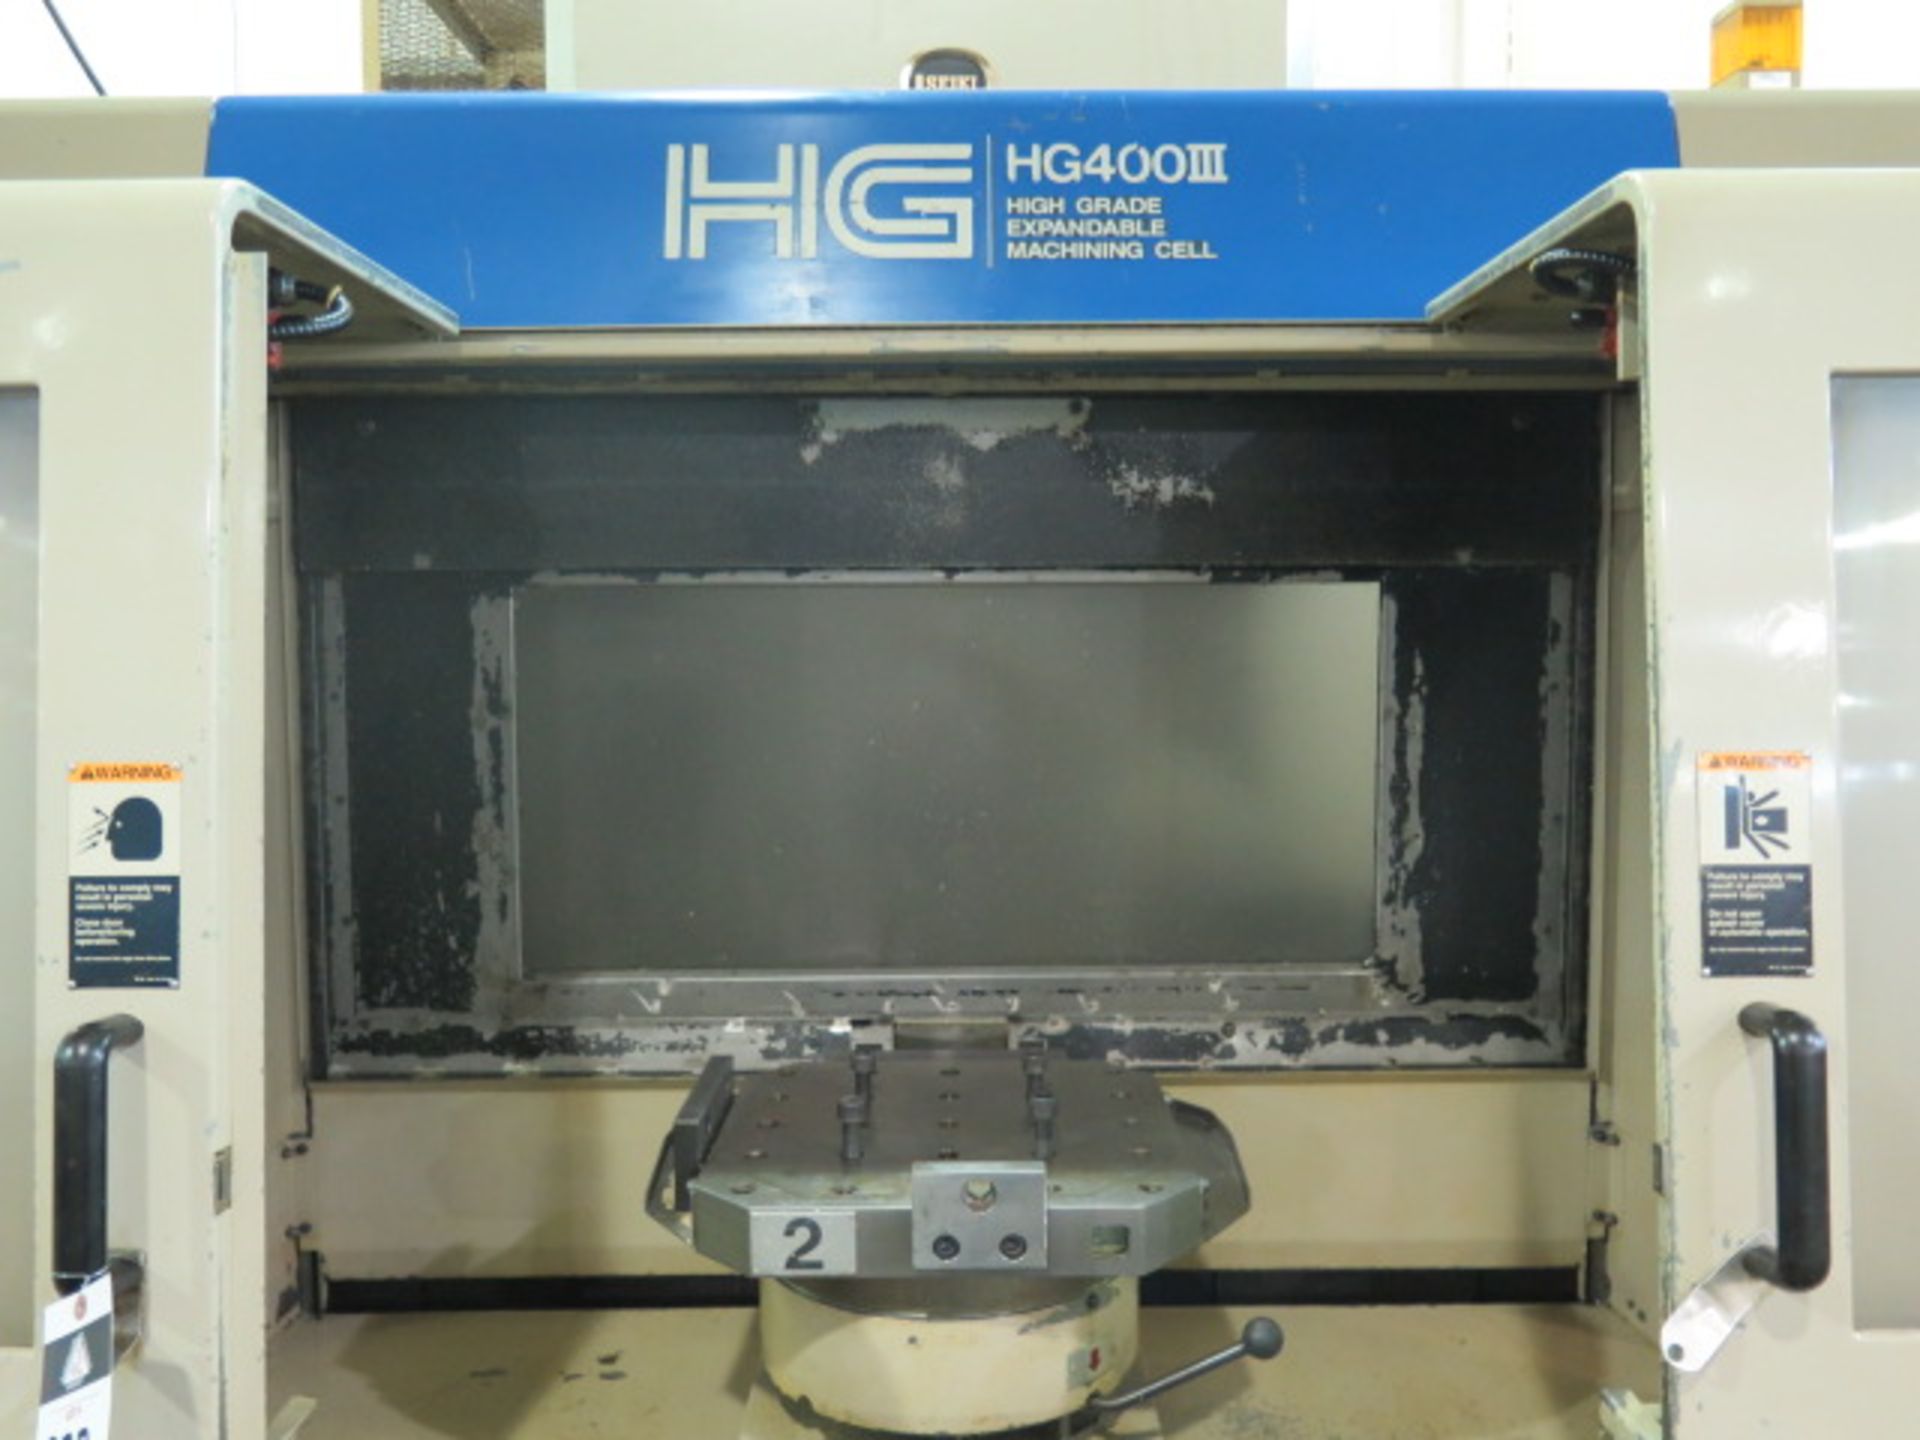 Hitachi Seiki HG400 III 2-Pallet 4-Axis CNC Horizontal Machining Center s/n HG43653 w/ SOLD AS IS - Image 13 of 26